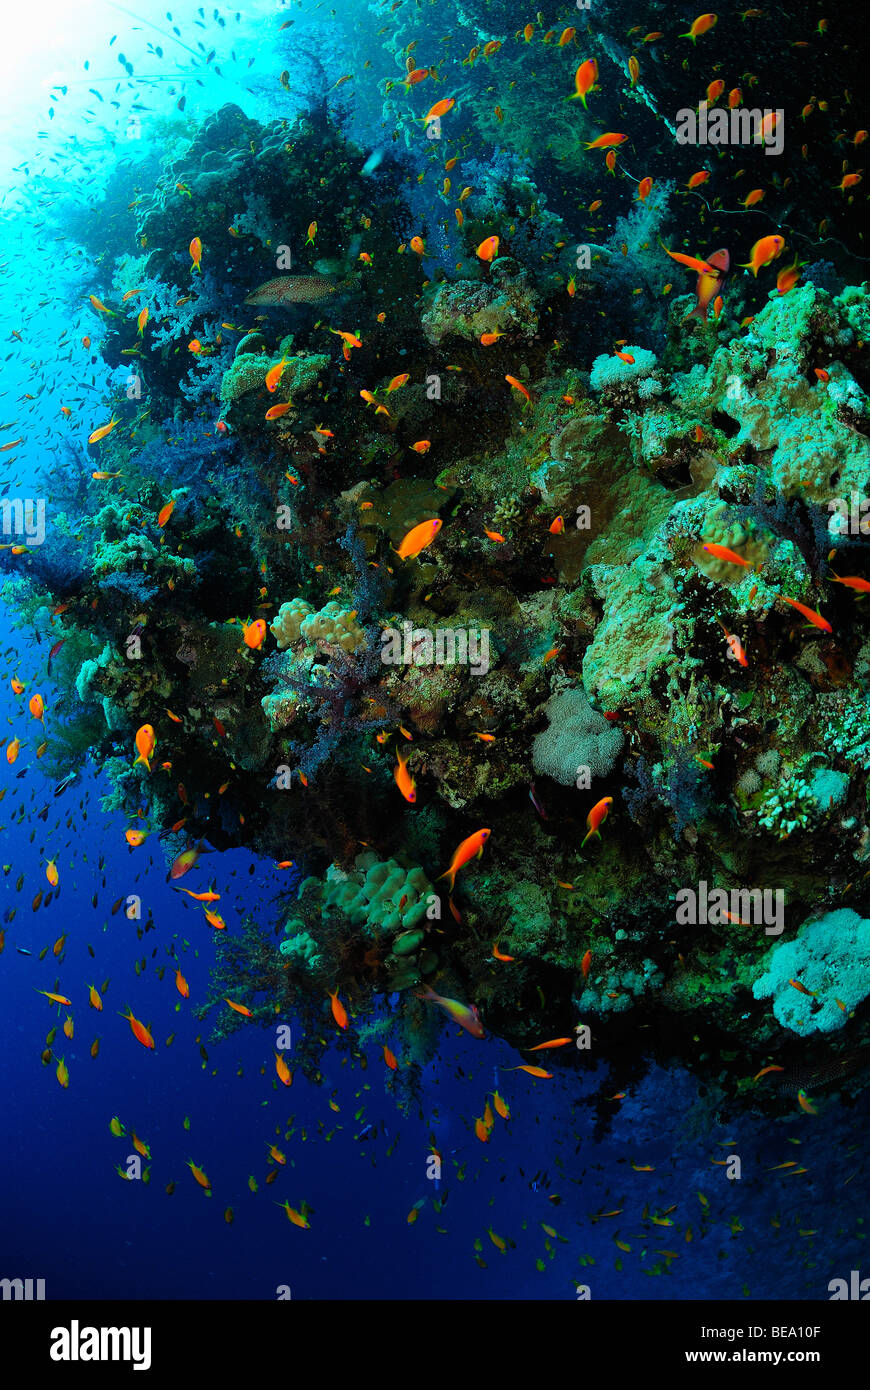 School of scalefin anthias fish over a reef in the Red Sea. Stock Photo